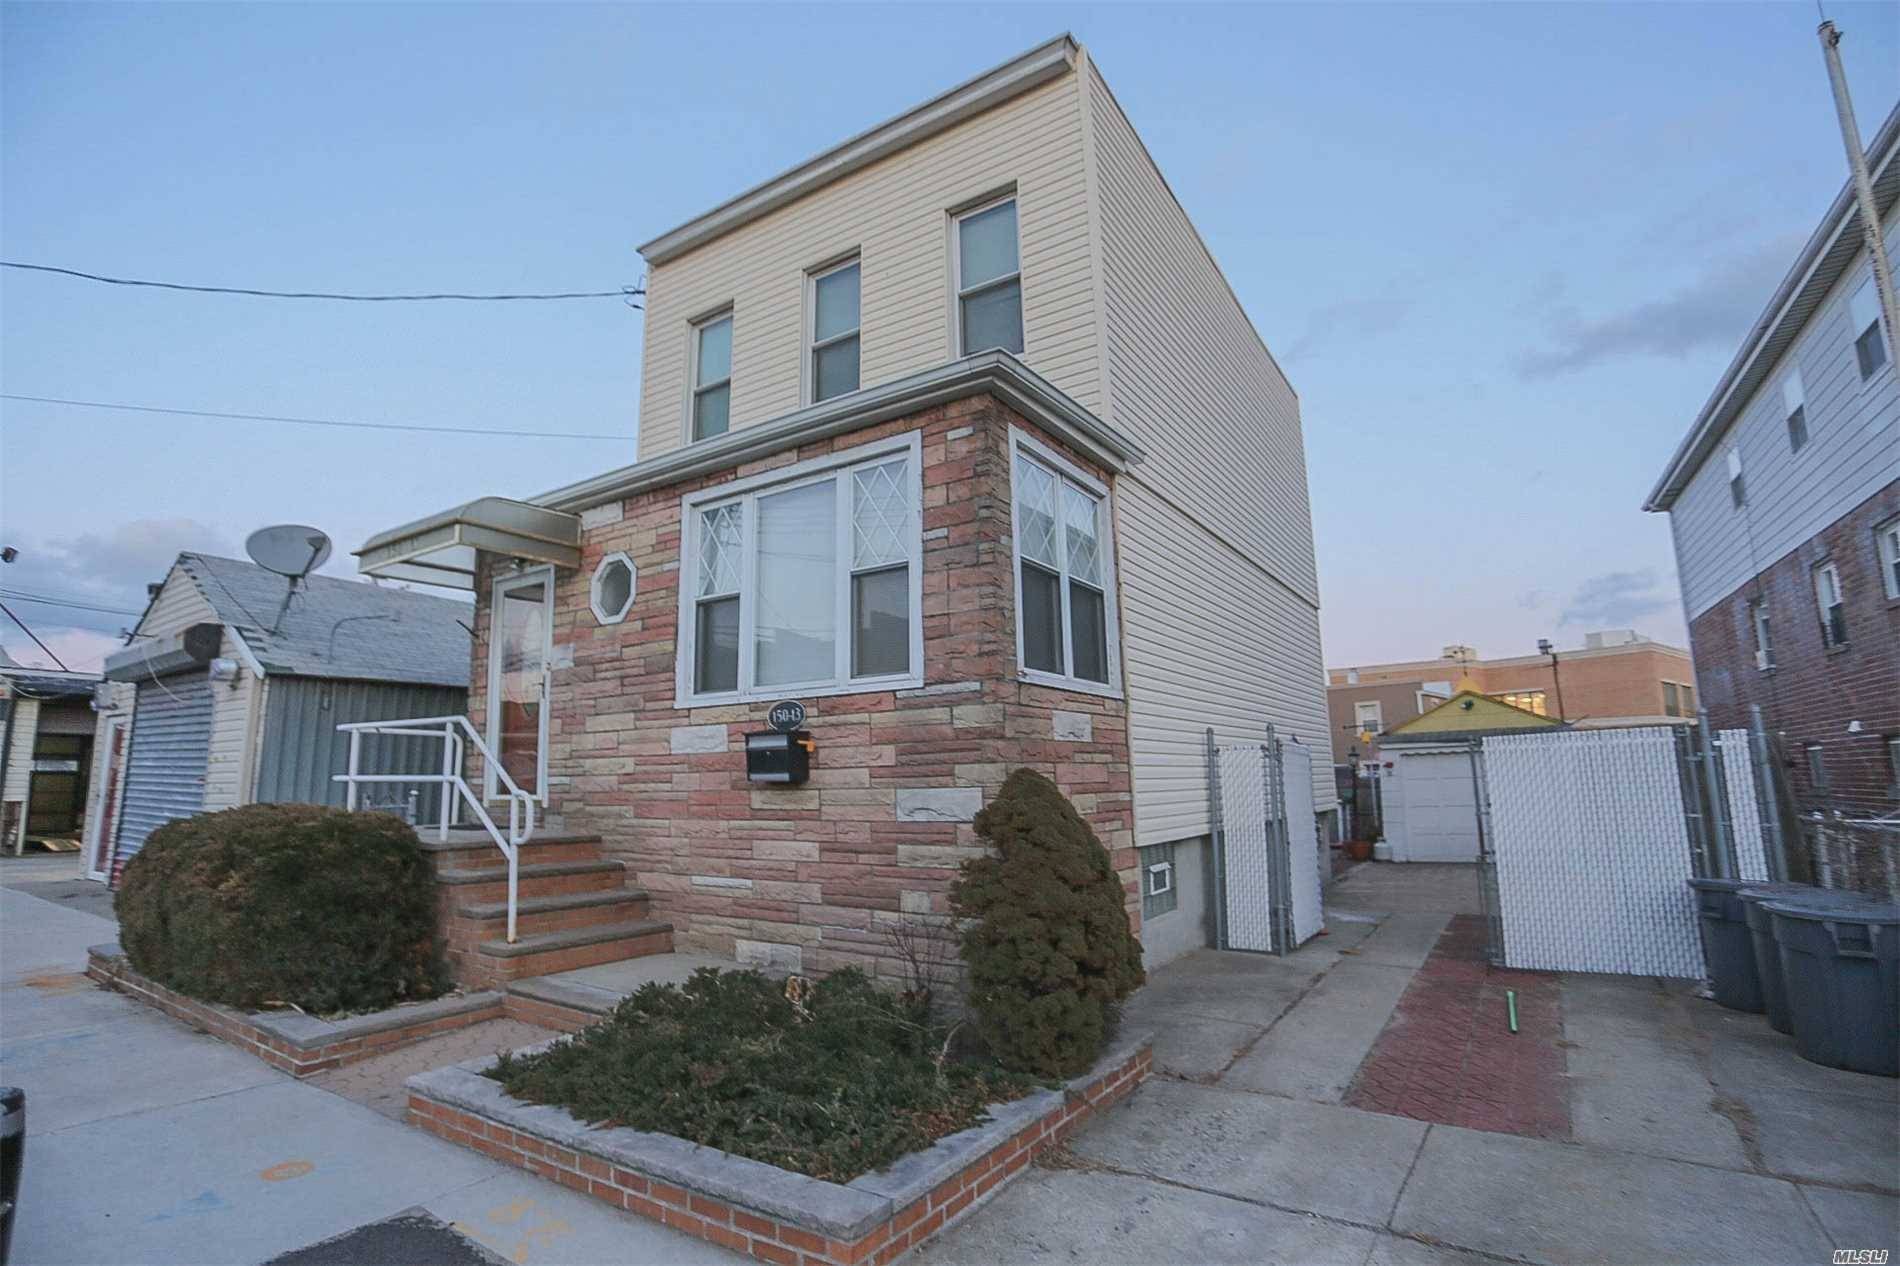 Fully Detached 1 Family Home For Sale In Ozone Park Queens.